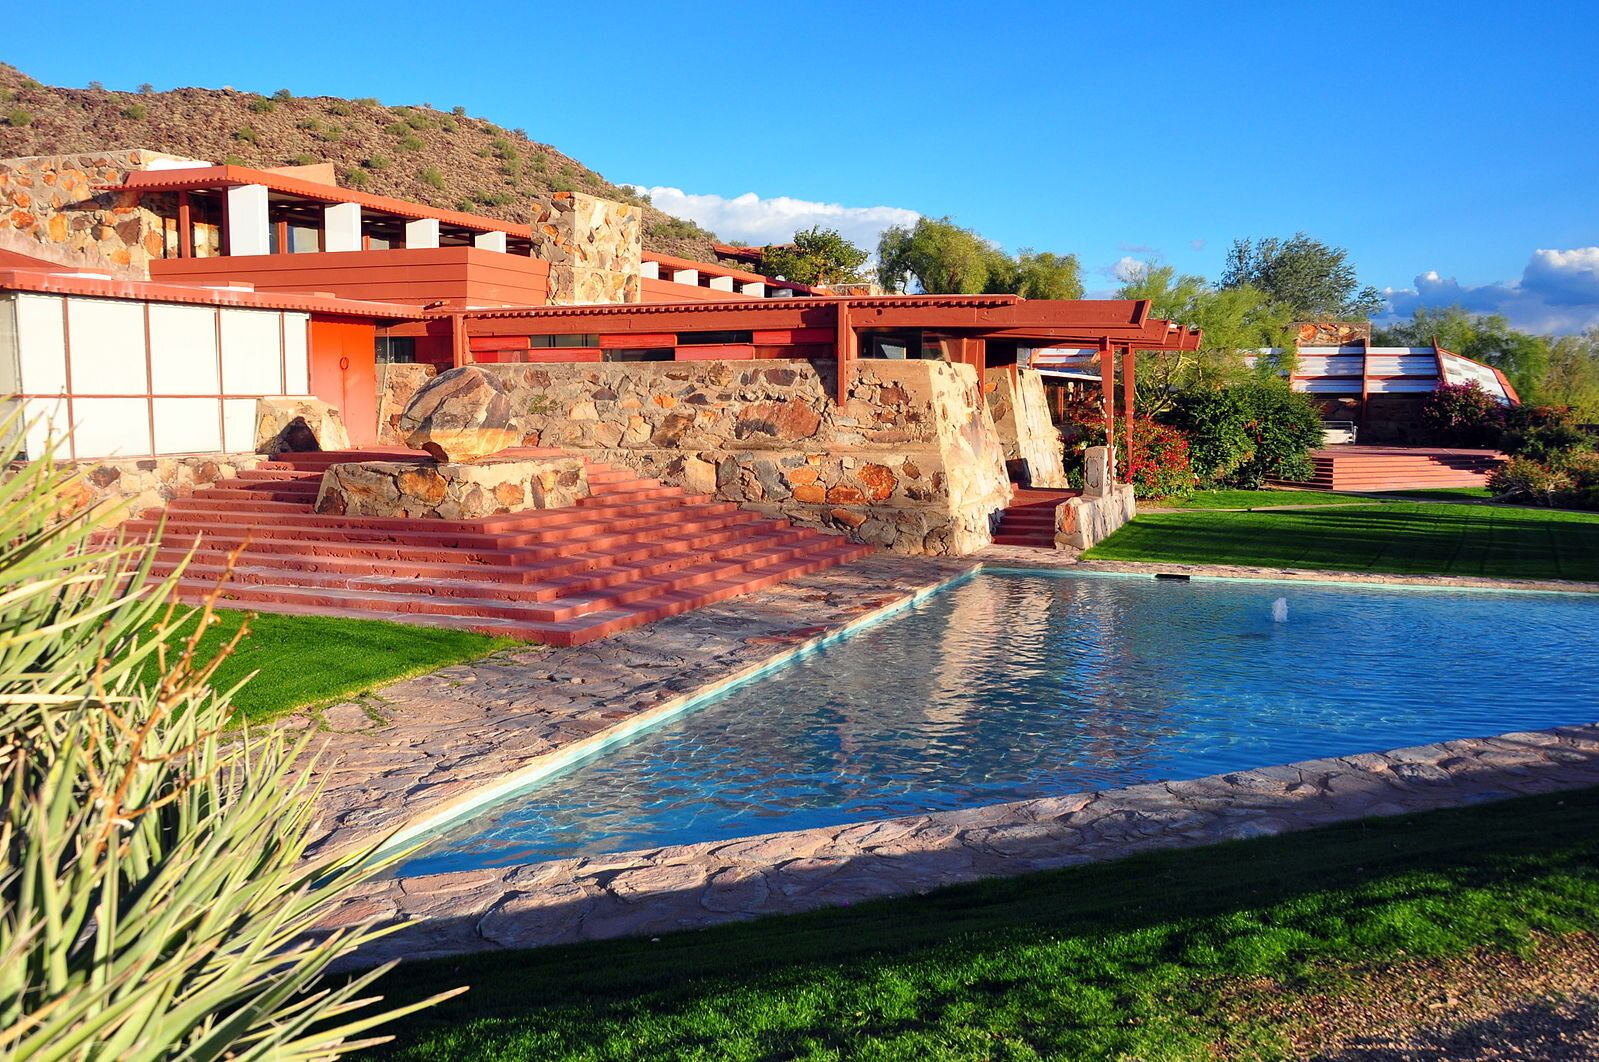  Here is Wright’s home, Taliesin West, set in the desert mountains. 